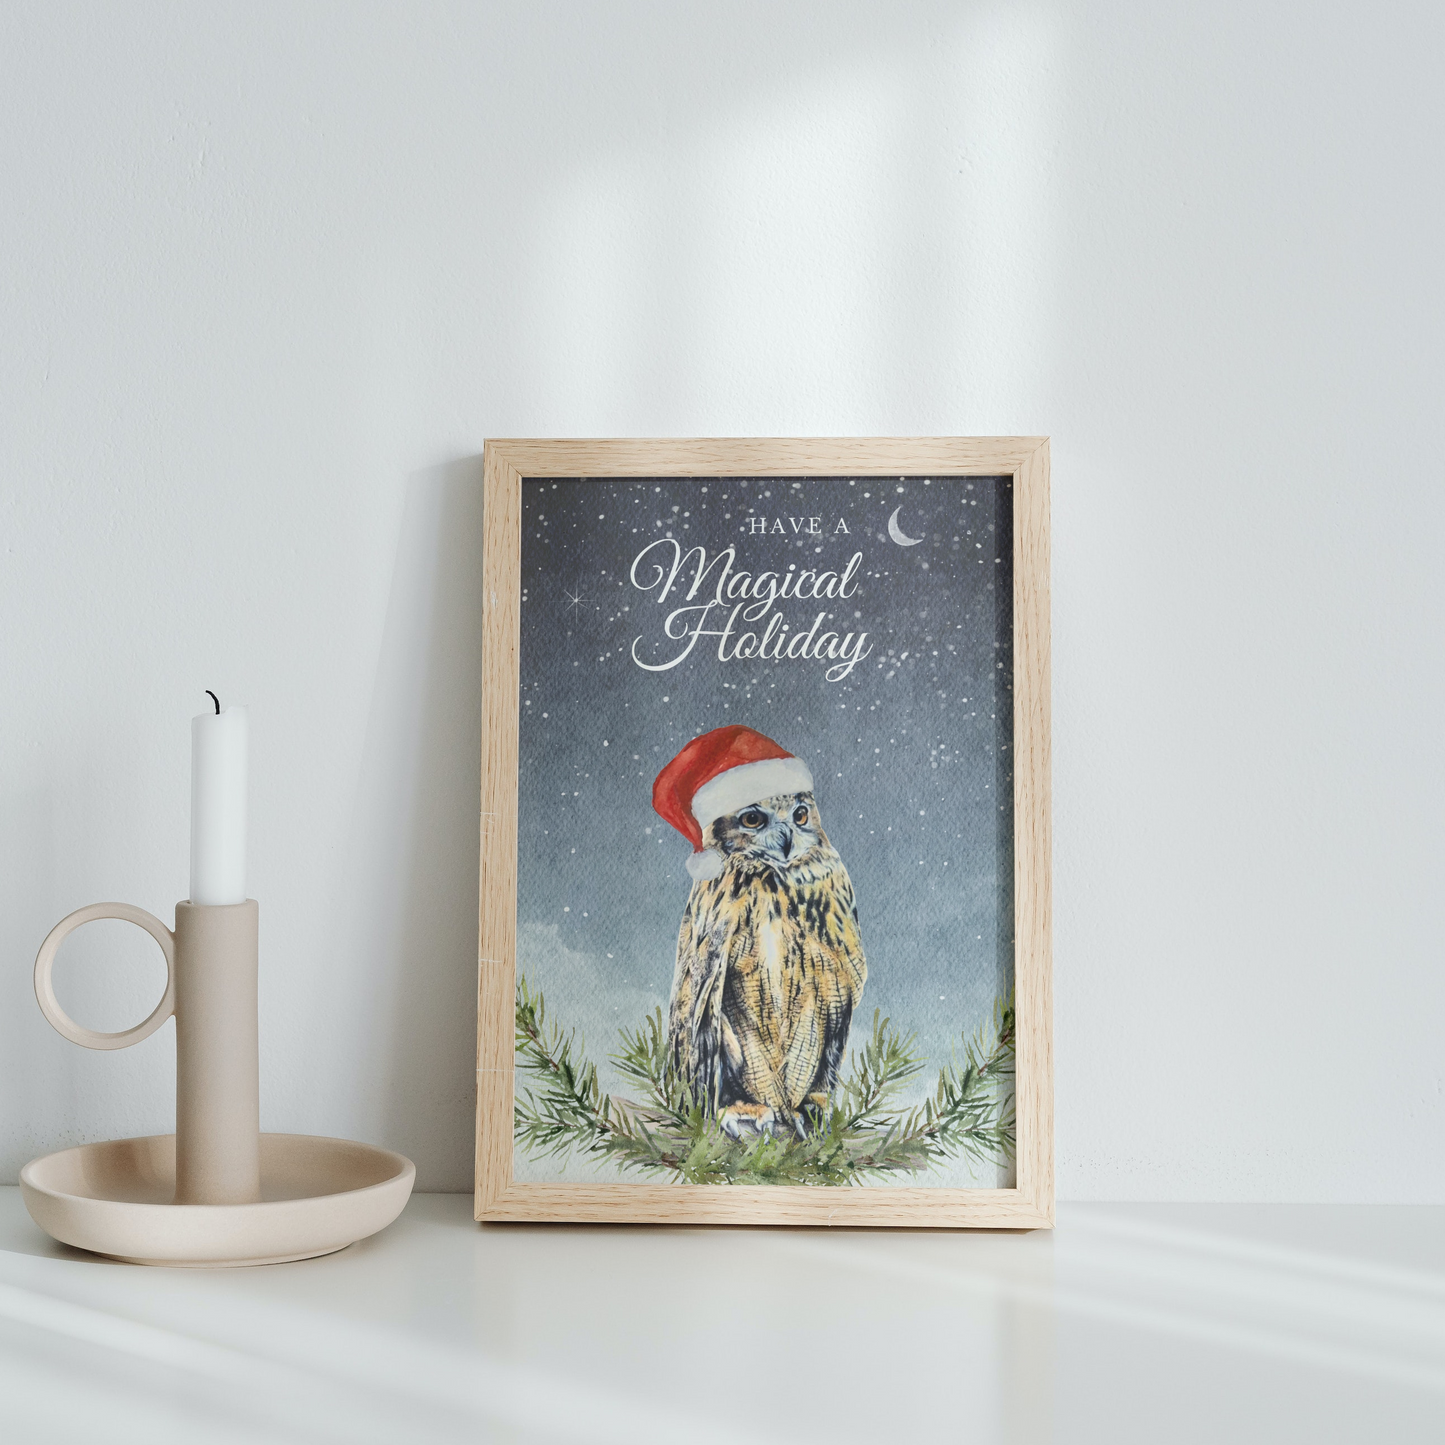 Have a Magical Holiday, Whimsical Owl Art, Art print on cardstock